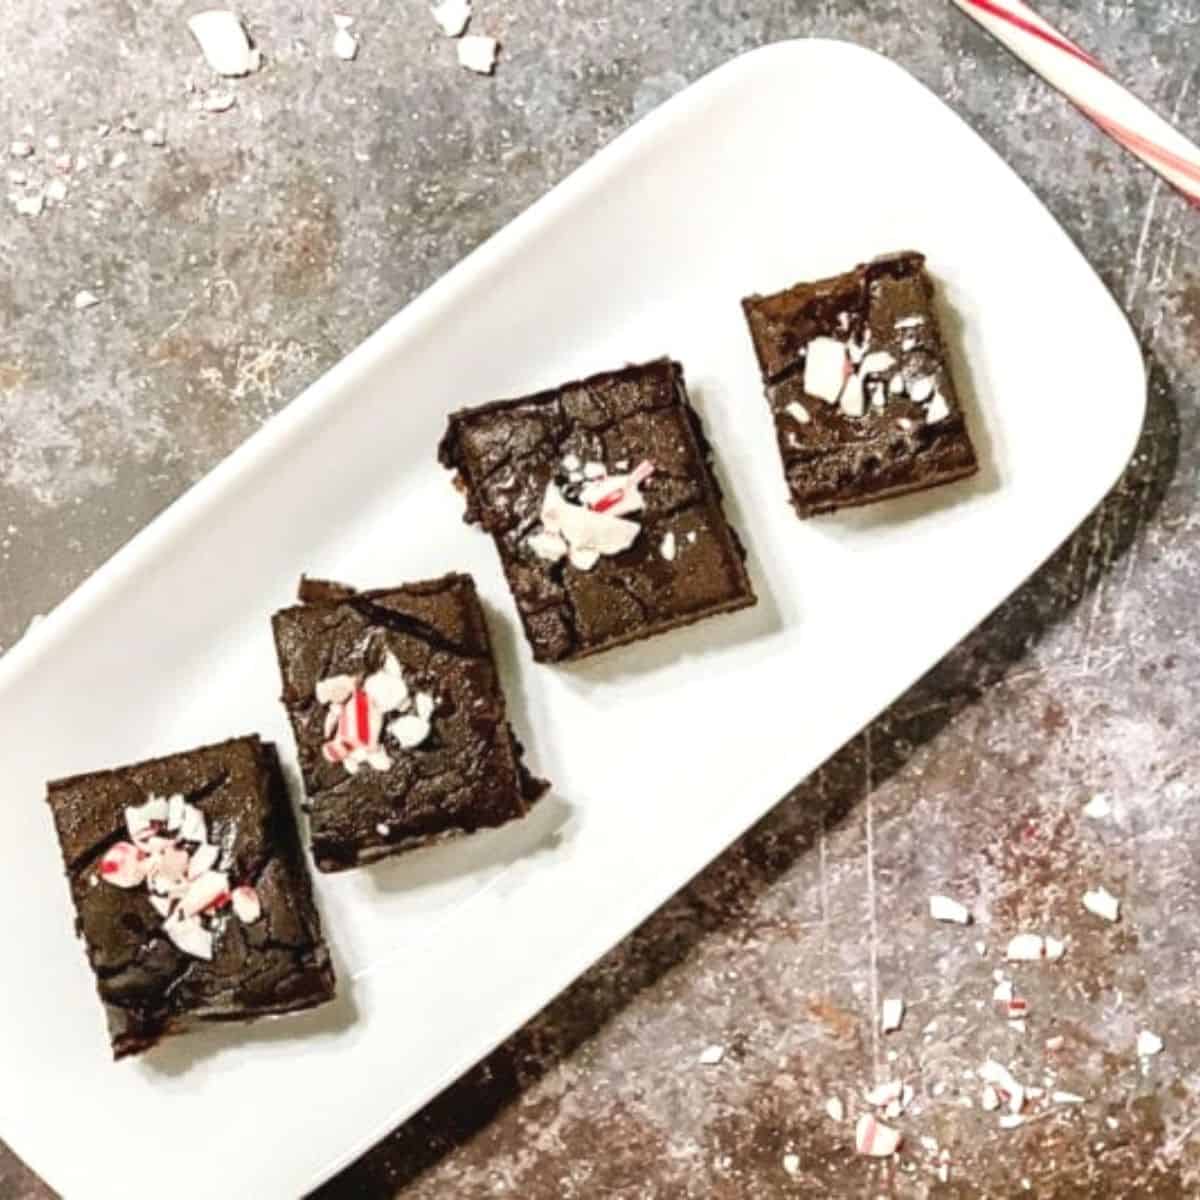 How to Make Easy Gluten-Free Peppermint Black Bean Brownies